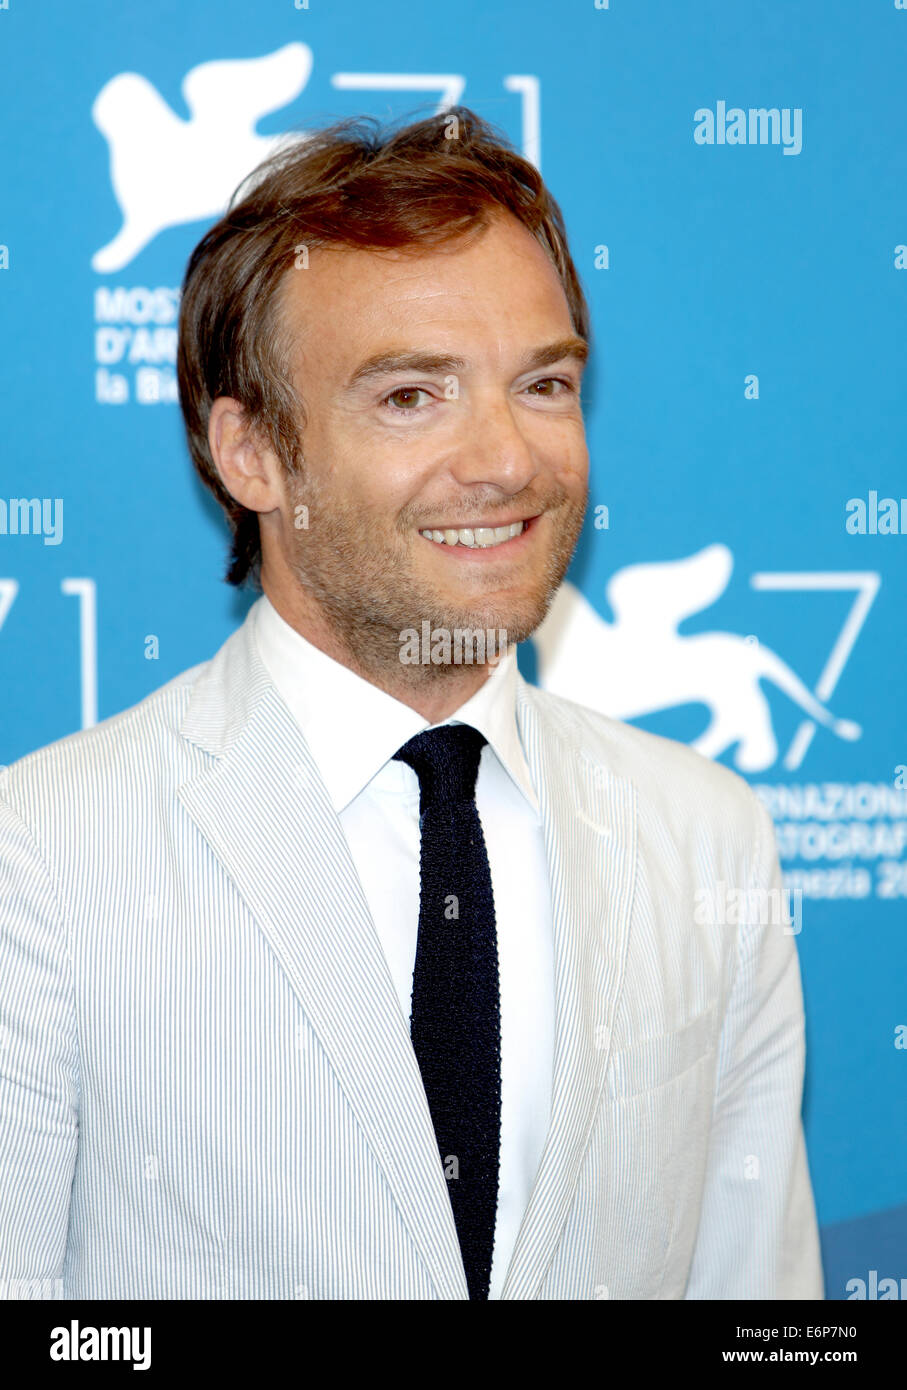 Venice, Italy. 28th Aug, 2014. French actor/cast member Jonathan Lambert poses at a photocall for 'Reality' during the 71st annual Venice International Film Festival, in Venice, Italy, 28 August 2014. The movie is presented in the Orizzonti section at the festival that runs from 27 August to 06 September. Photo: Hubert Boesl/dpa/Alamy Live News Stock Photo